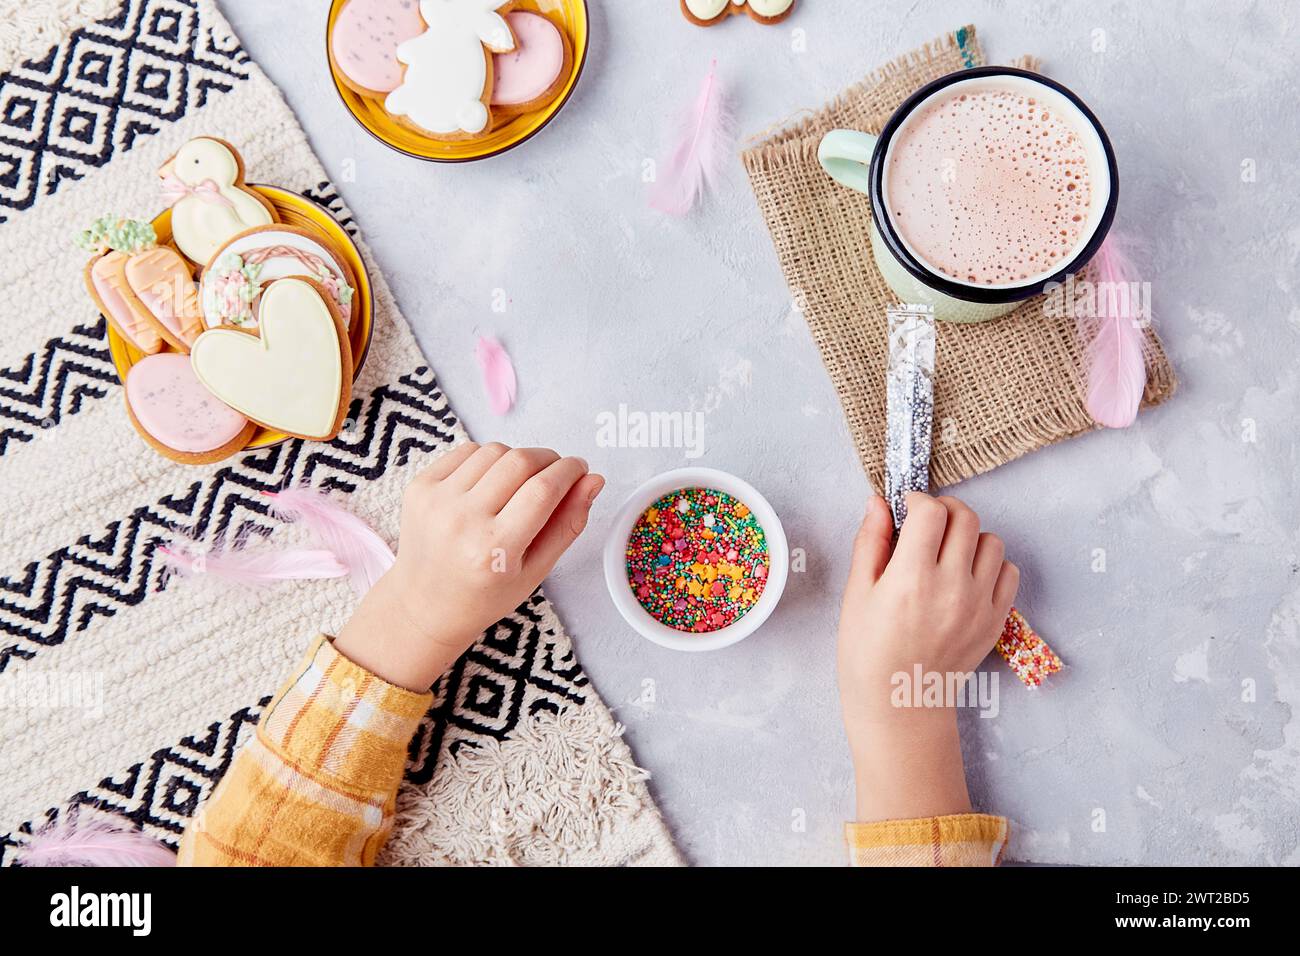 Delightful Easter, child adorns cookies with colorful sprinkles flat lay. Stock Photo